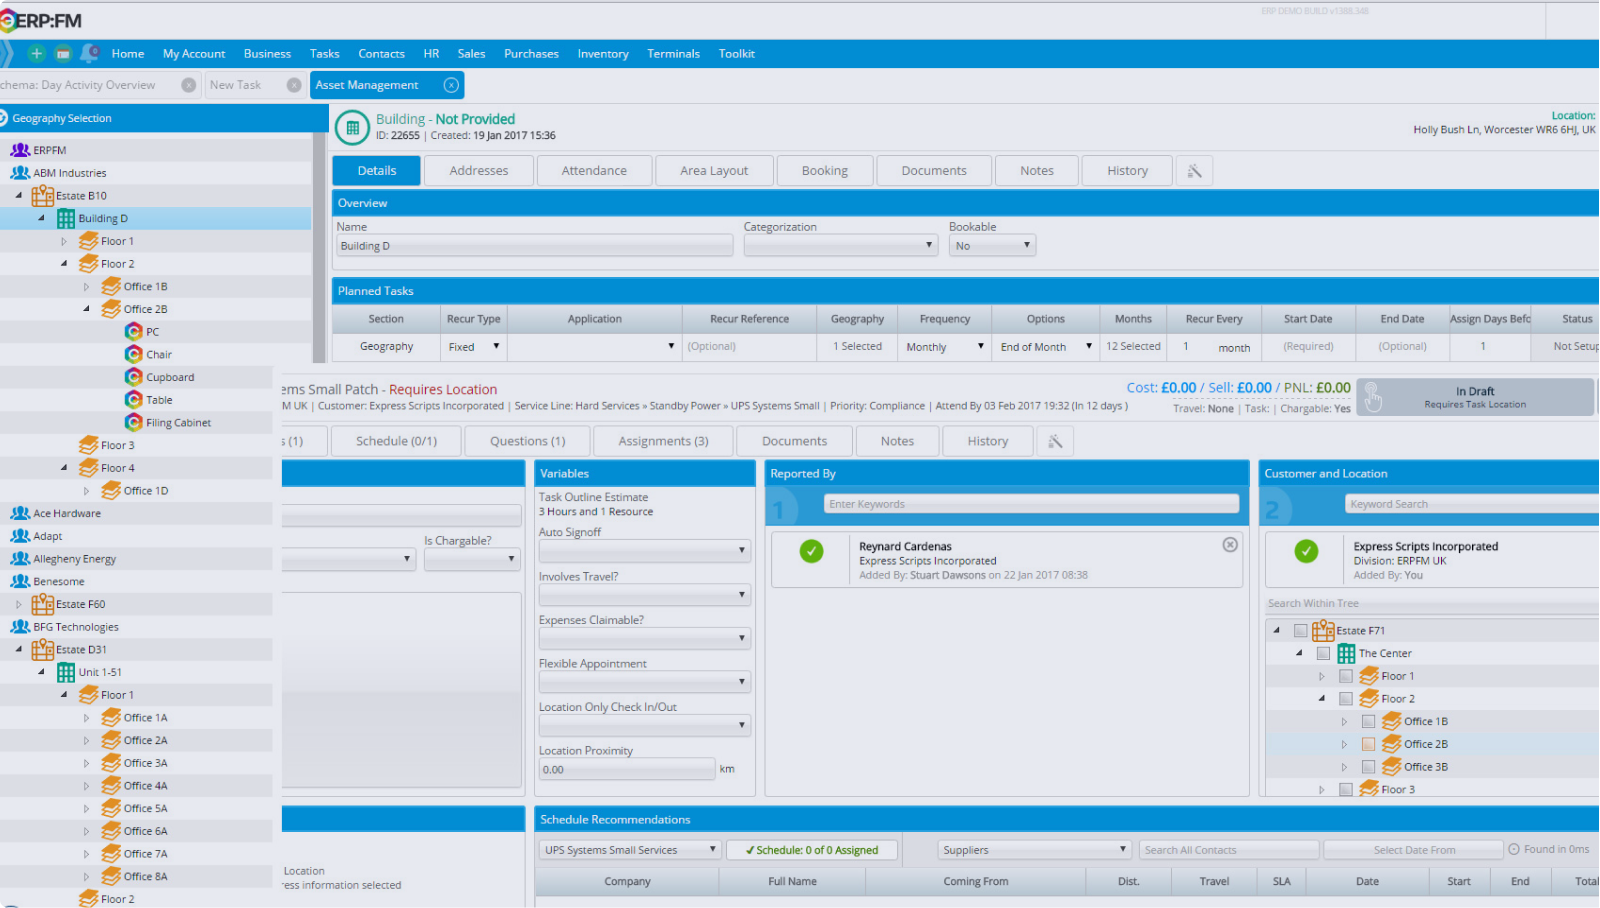 View of finance data in an ERP